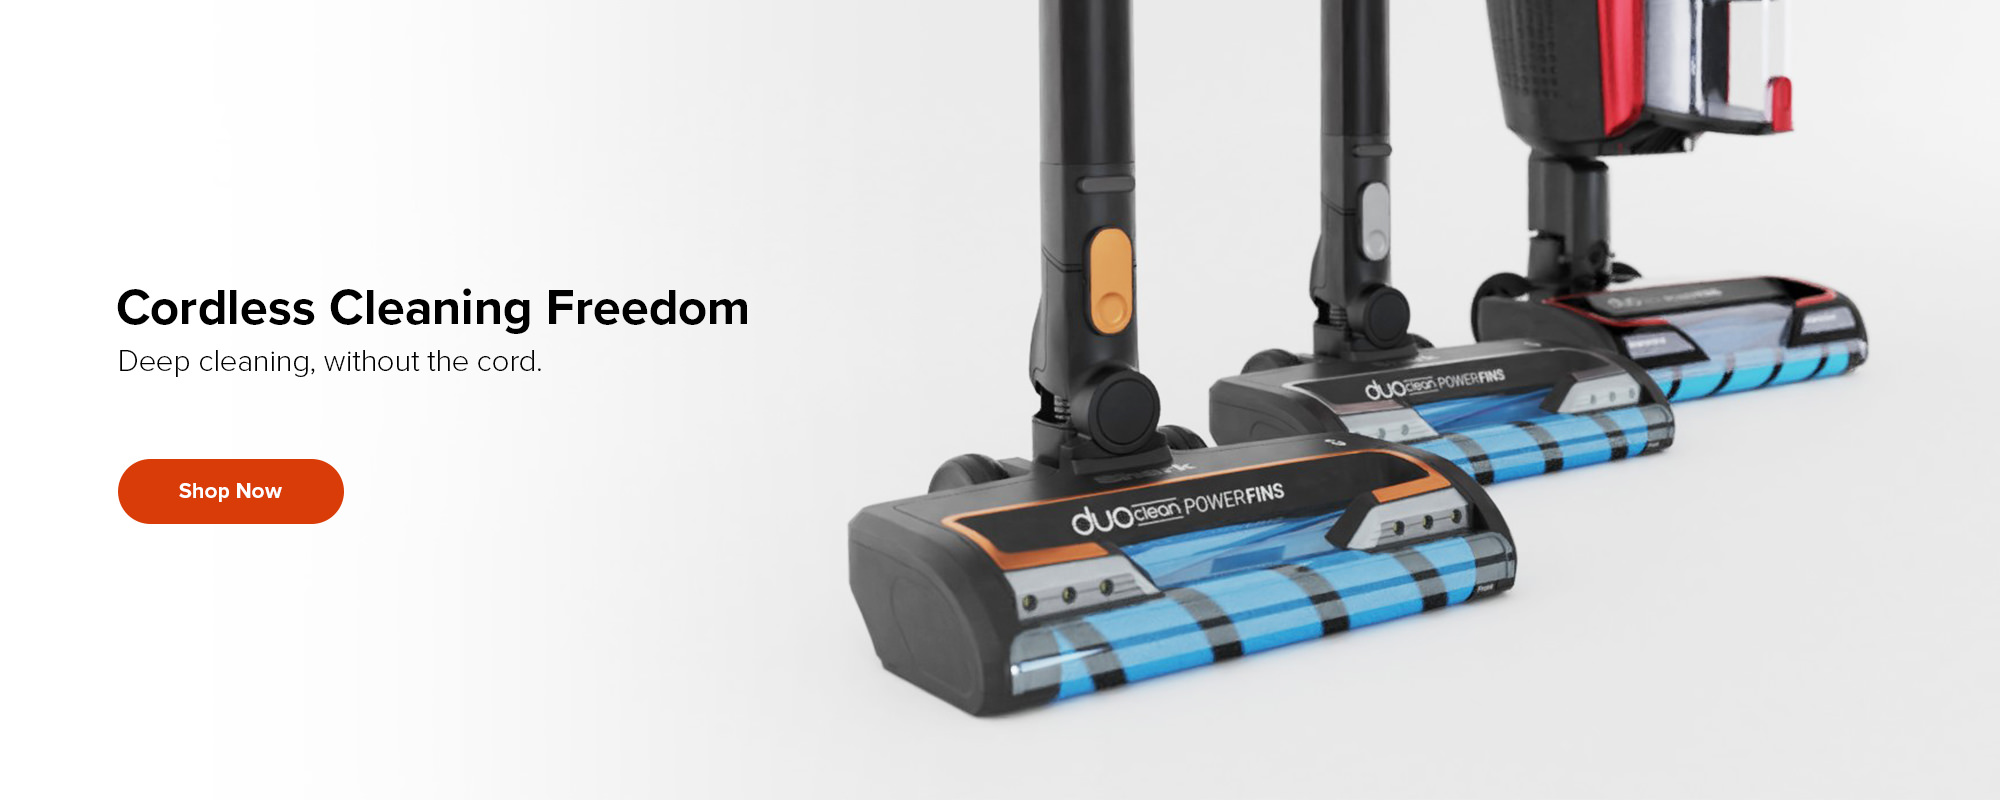 Enjoy cordless cleaning freedom with our range of Sharks Cordless Vacuums